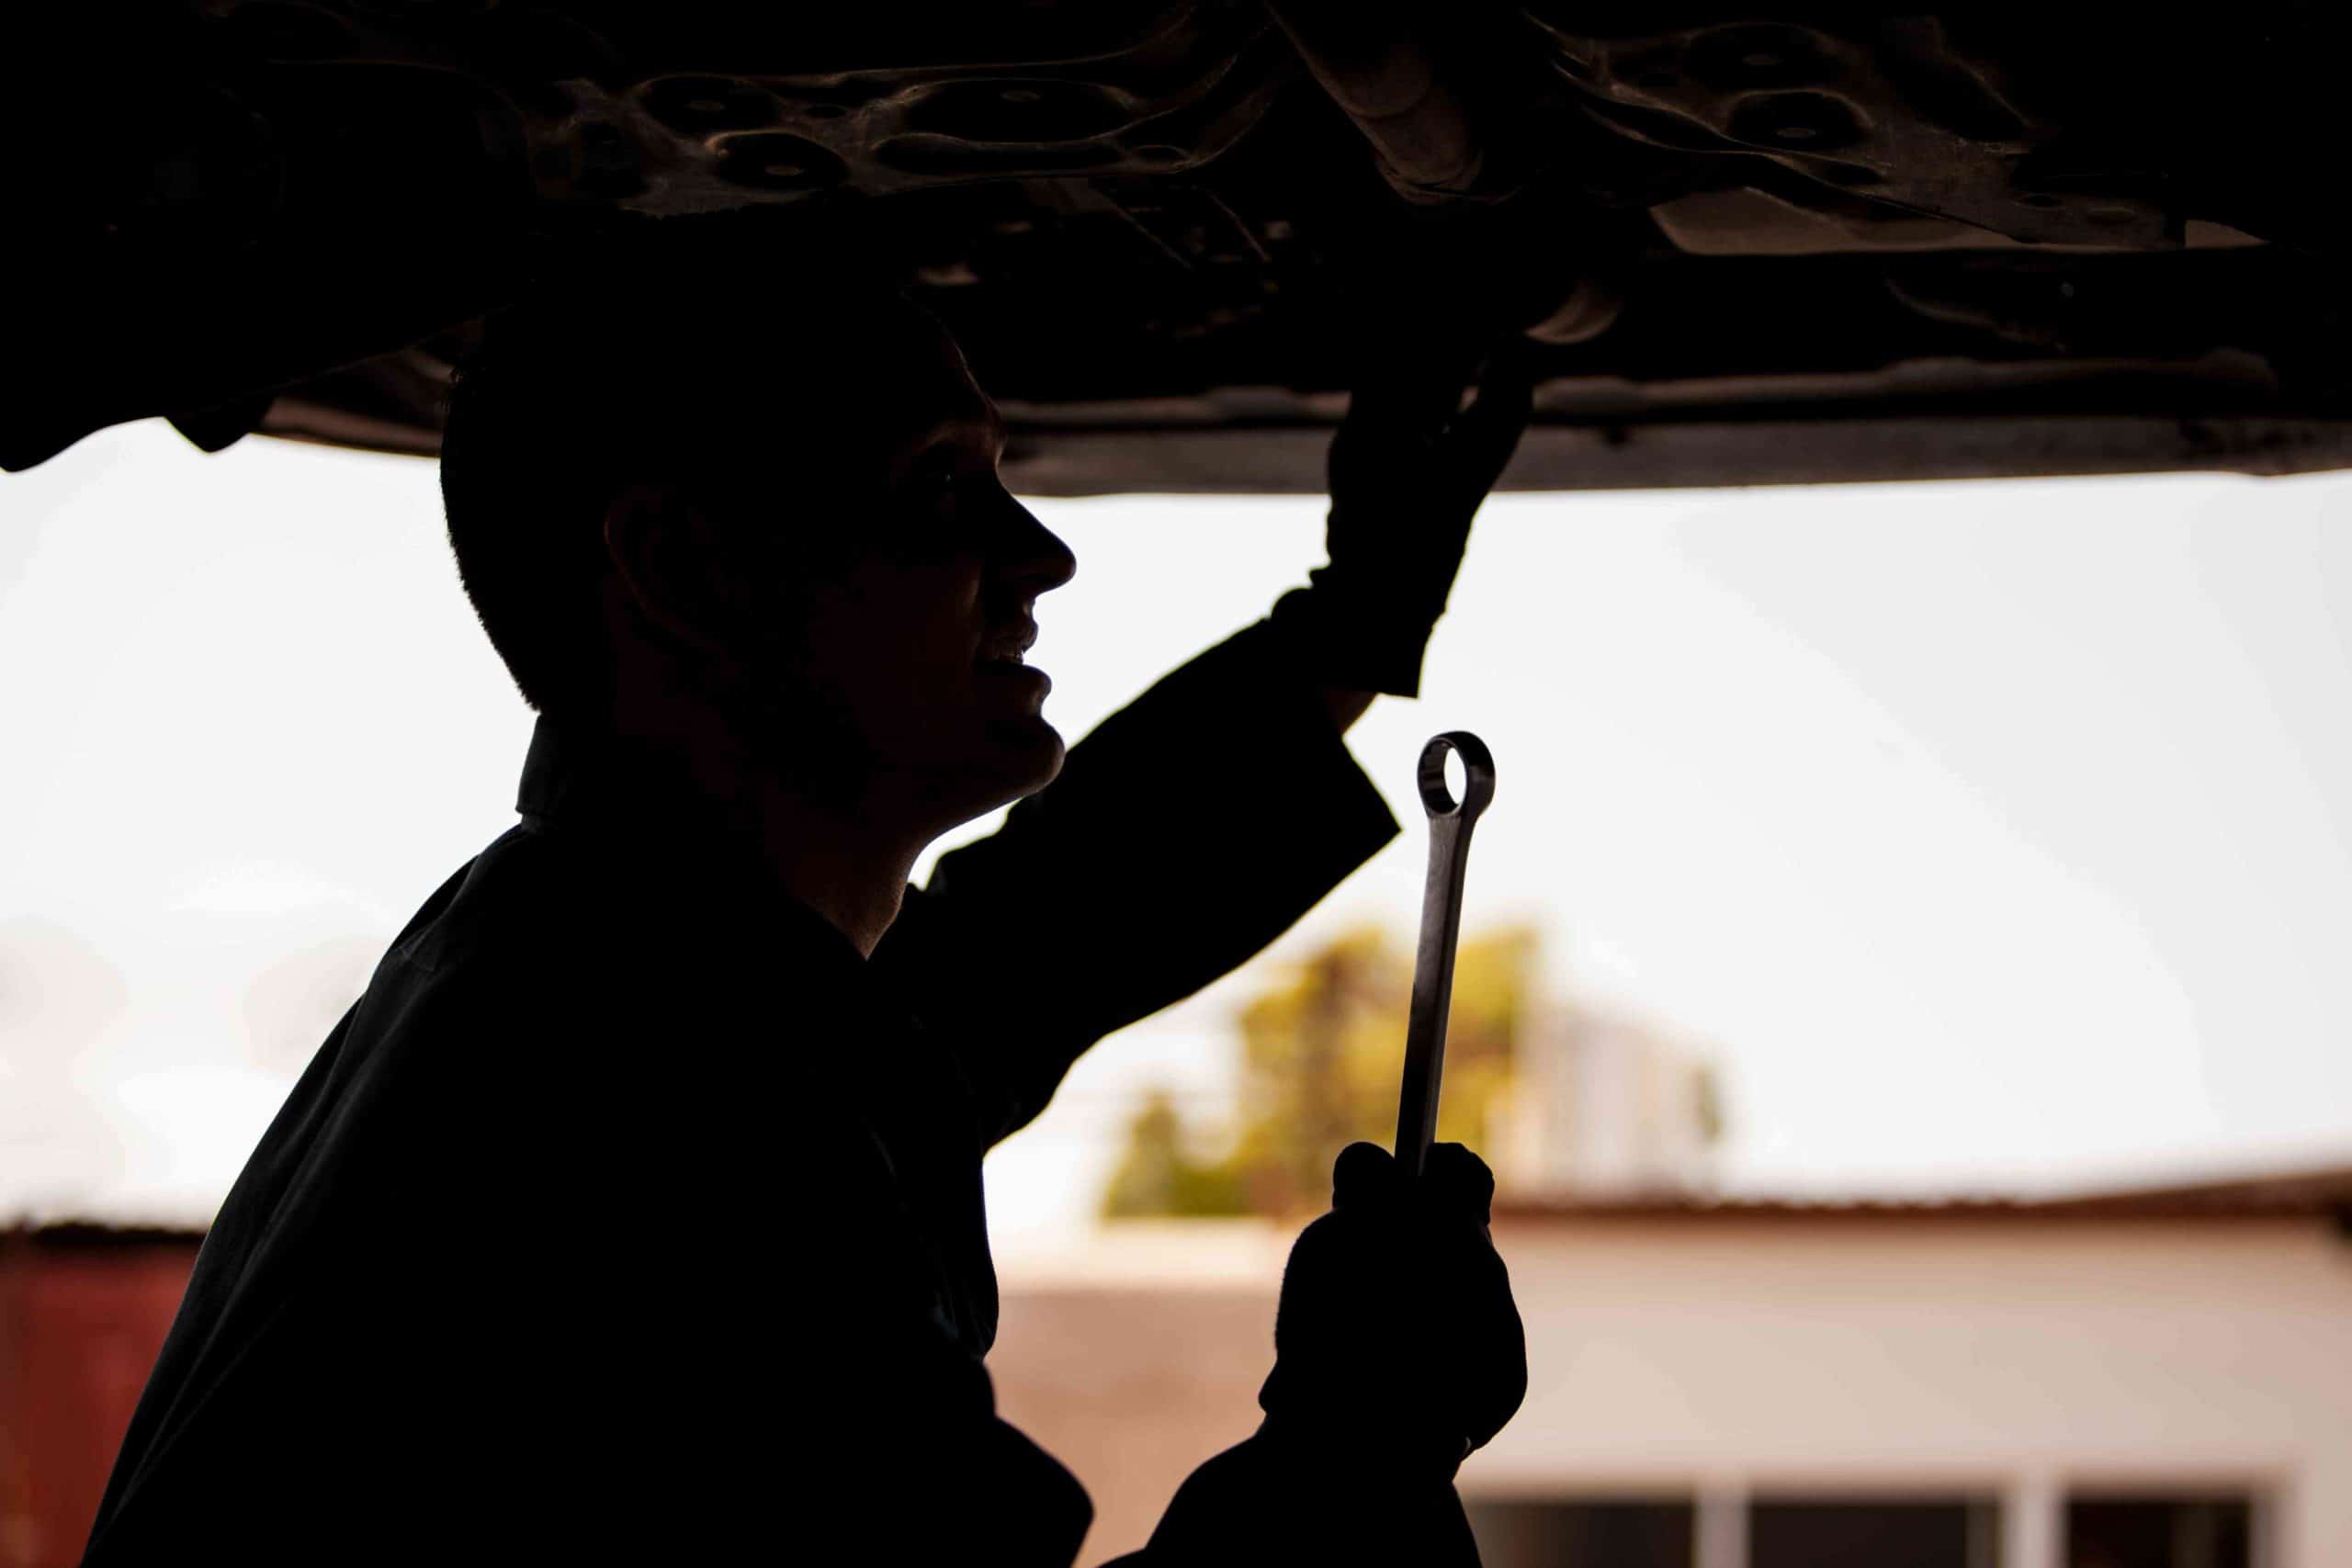 auto repair technician working on a car